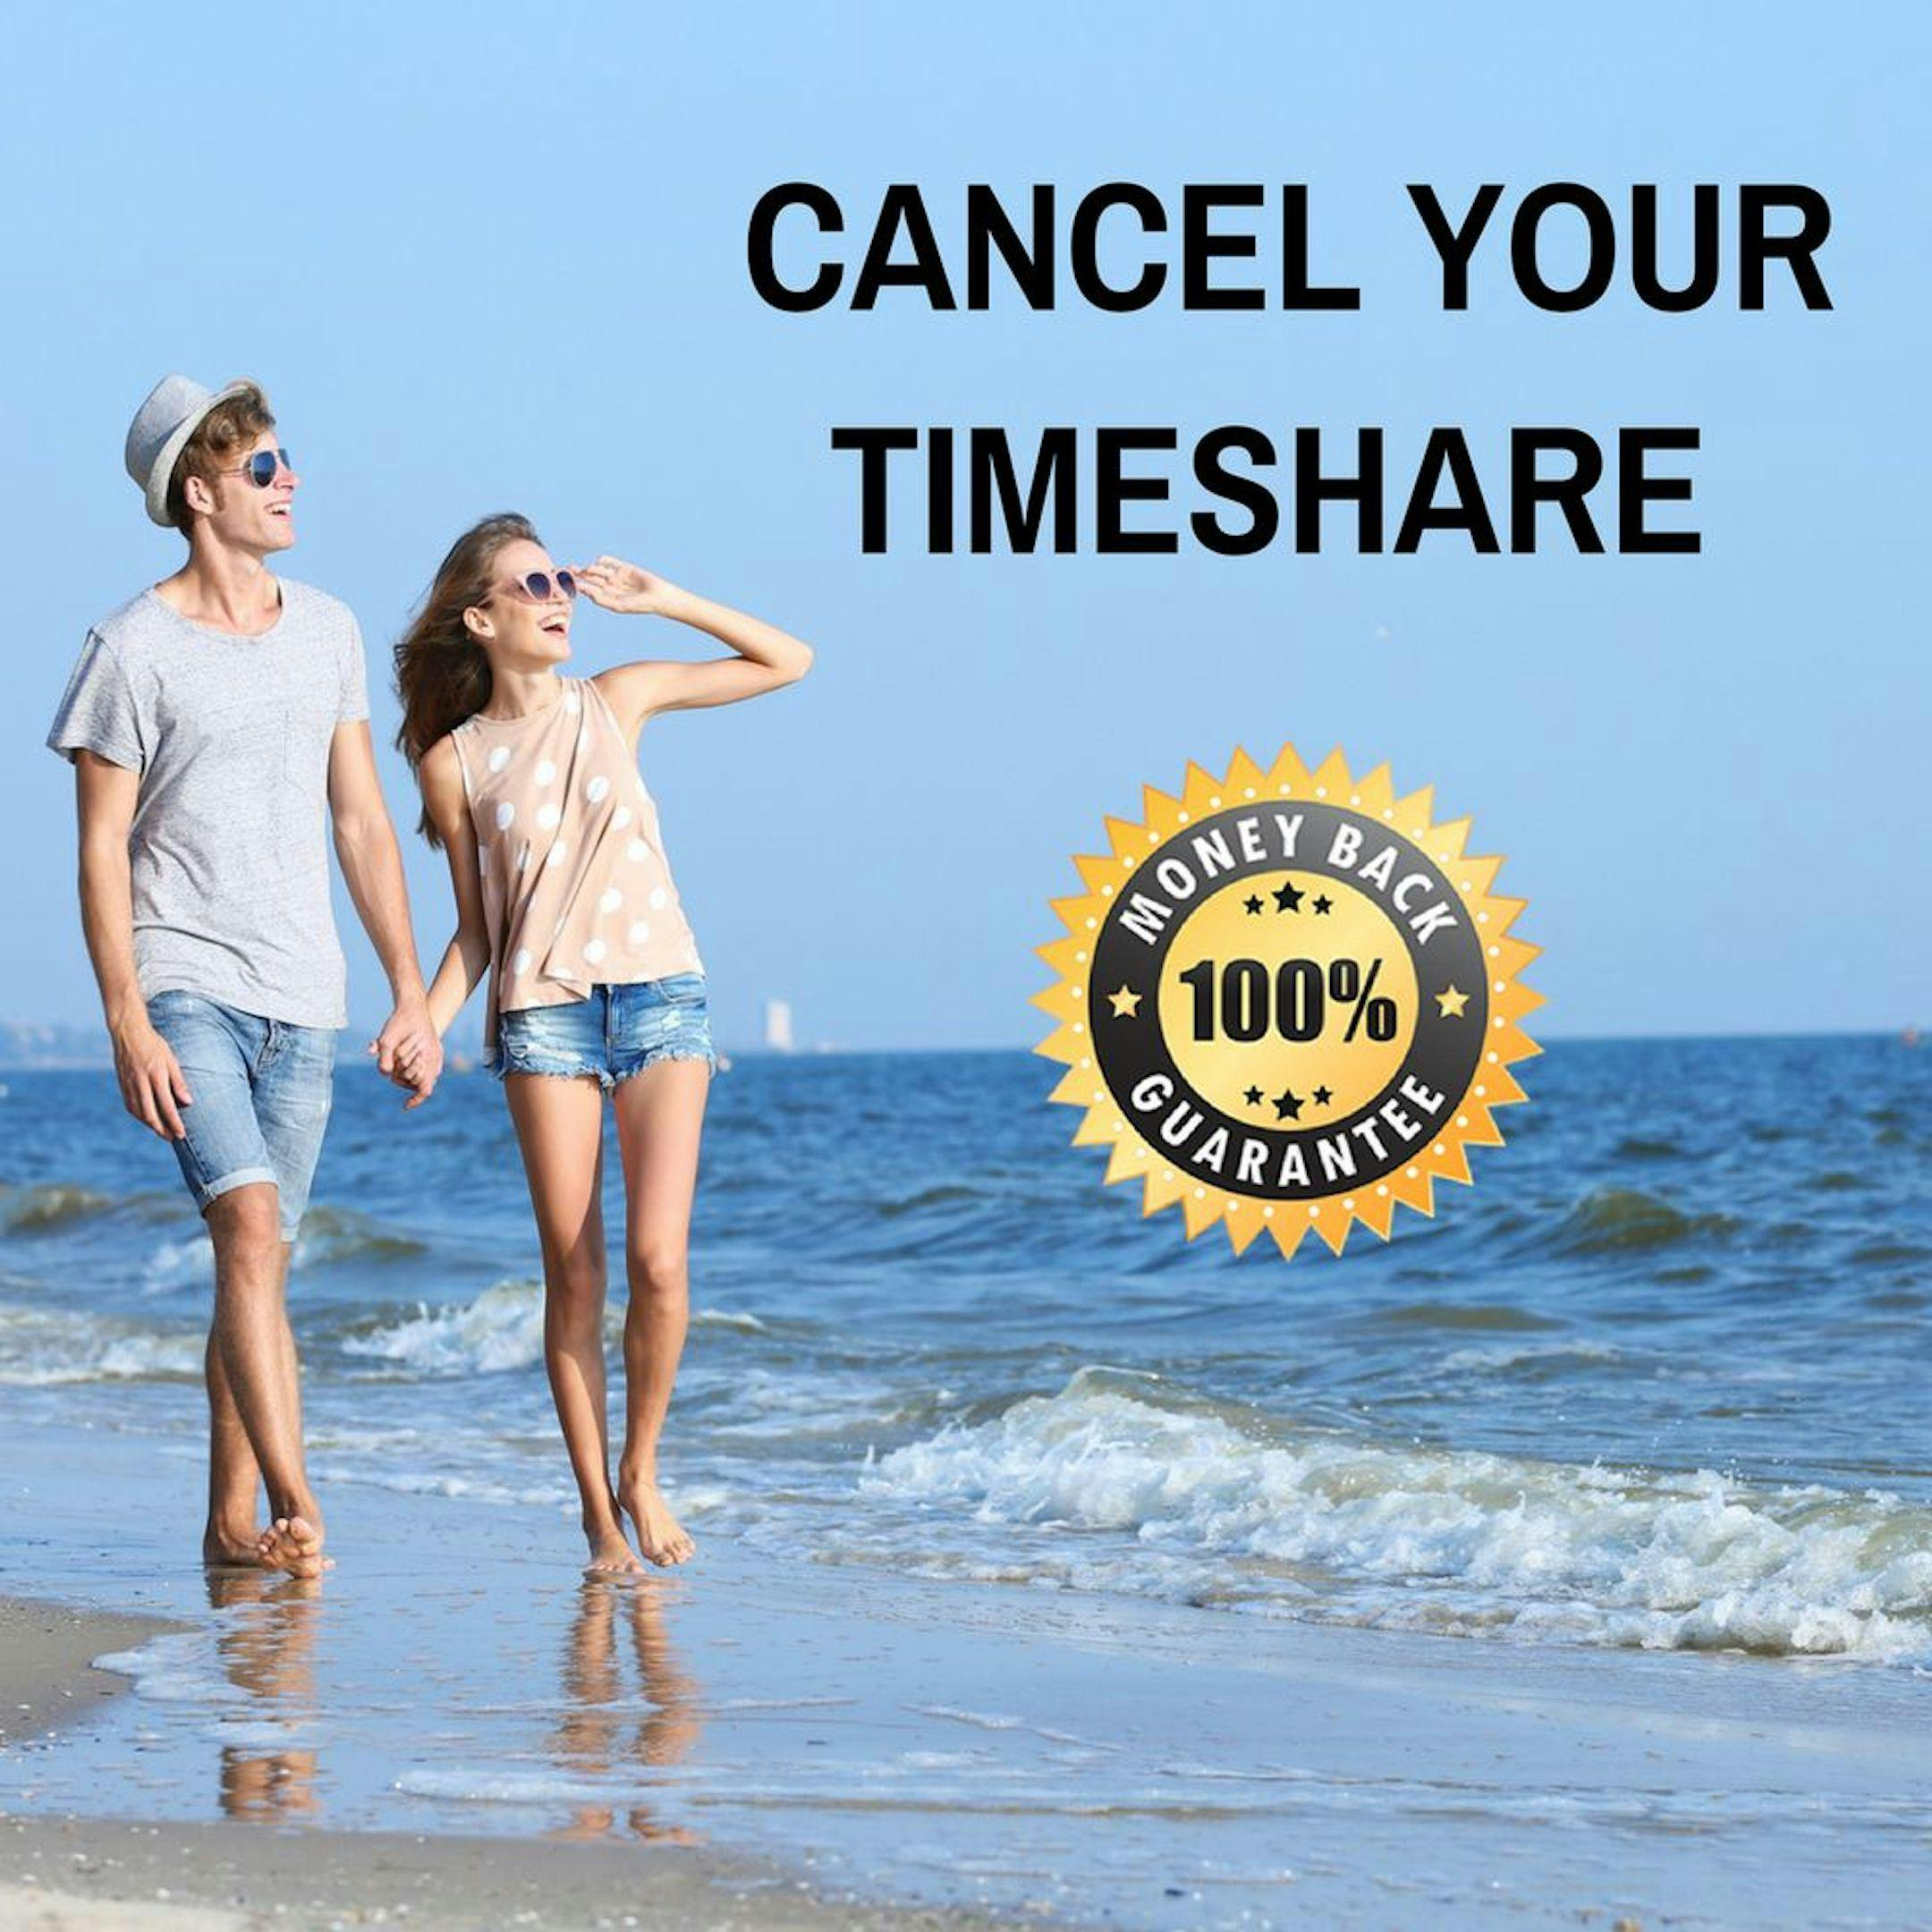 Get Out of Timeshare Contract Workshop - Athens, Ohio